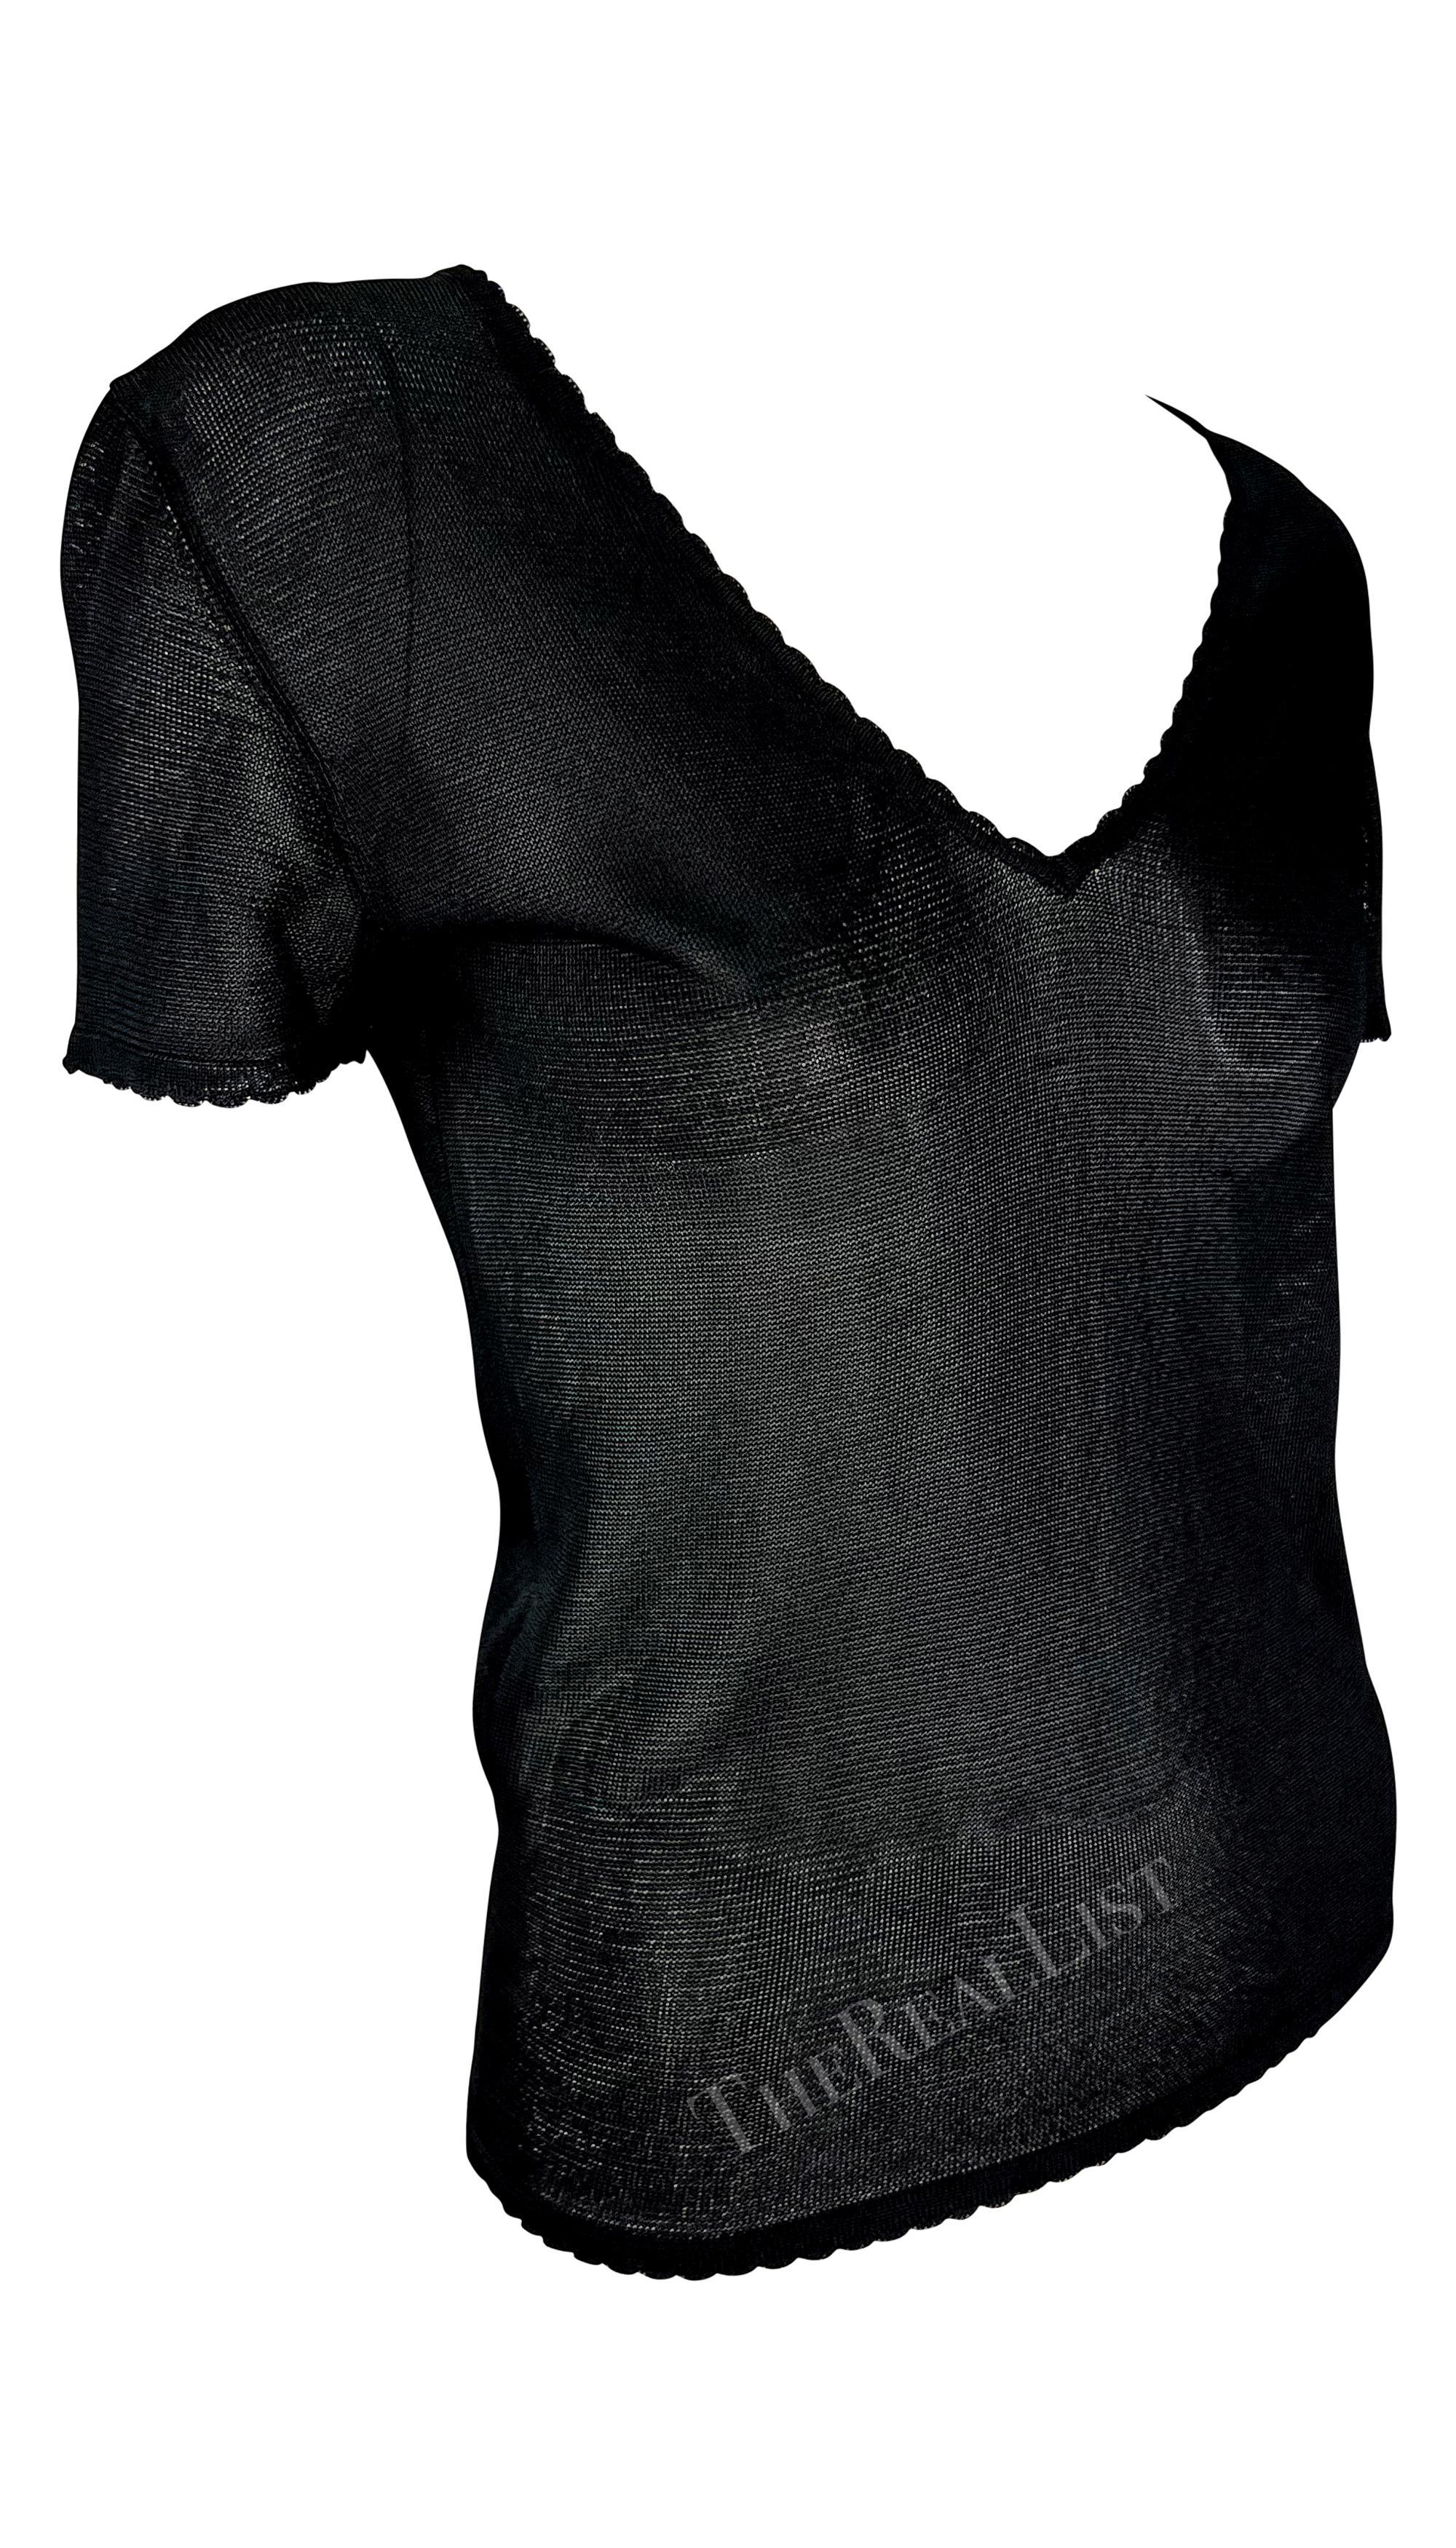 S/S 1997 Gianni Versace Scallop Knit Sheer Viscose V-Neck Black Sweater Top For Sale 4